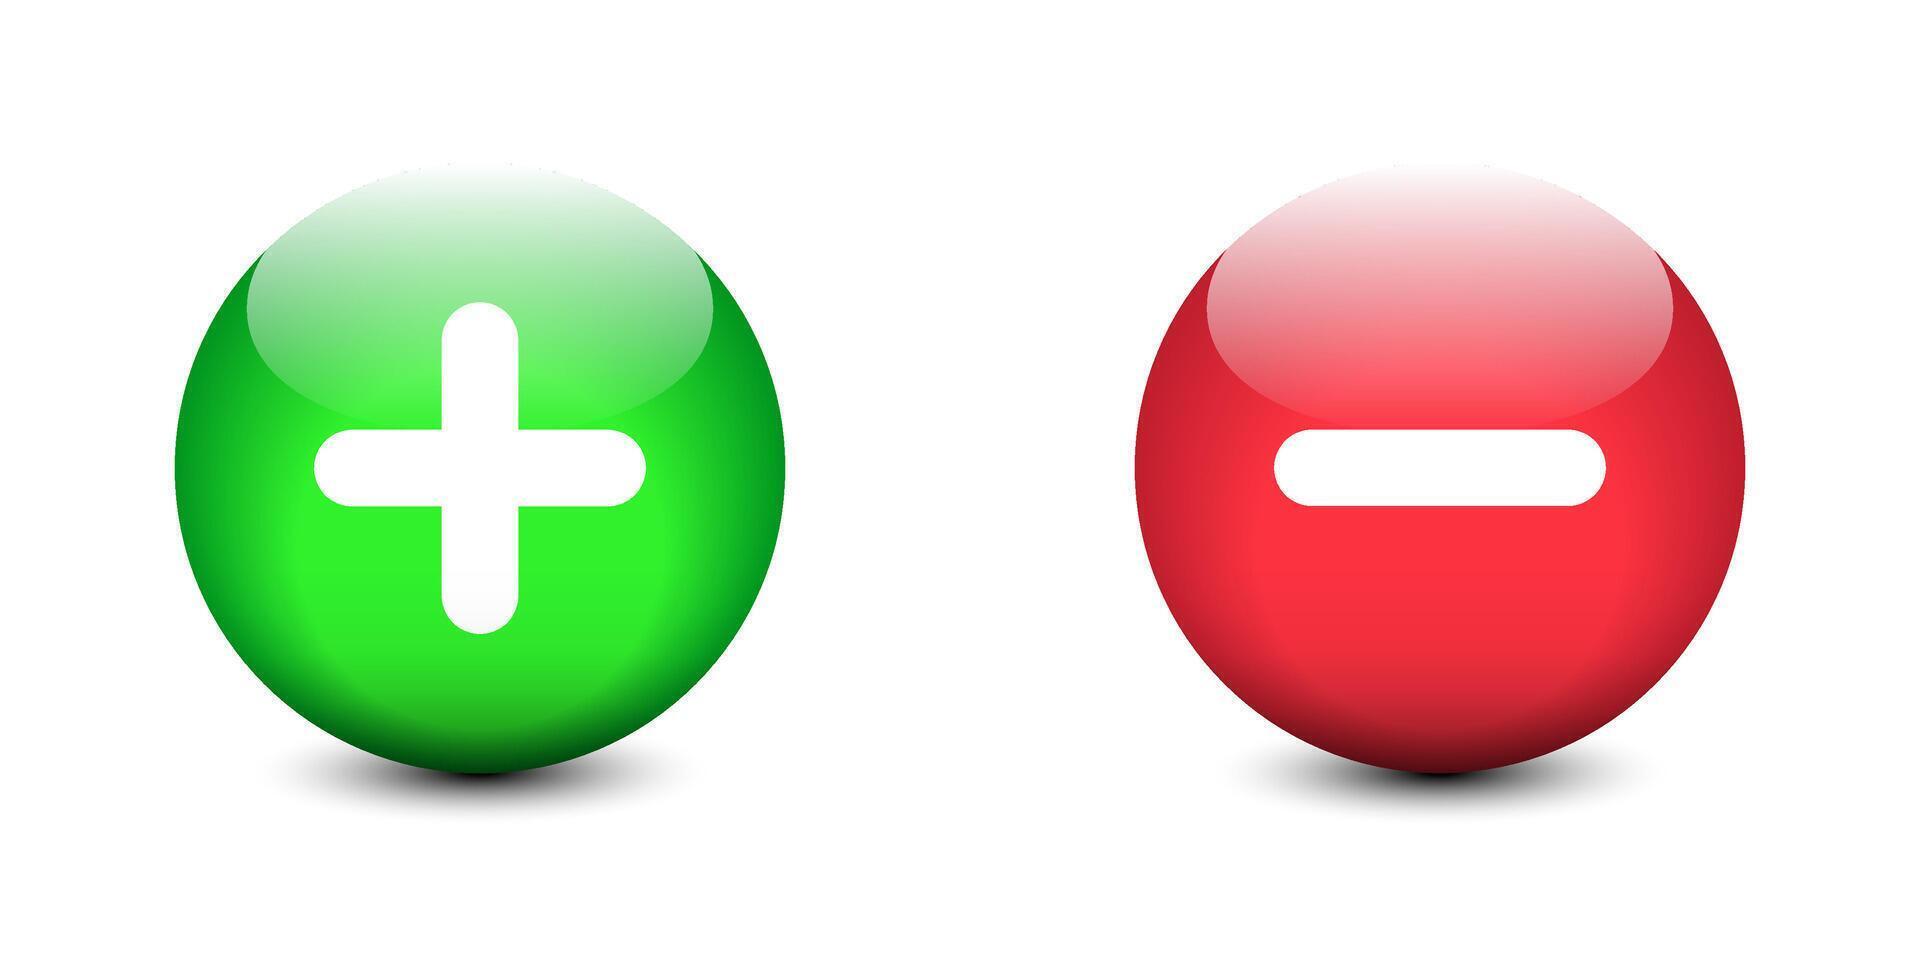 Plus minus in 3d style colorful buttons with shadows underneath. Positive and negative buttons. Vector illustration.